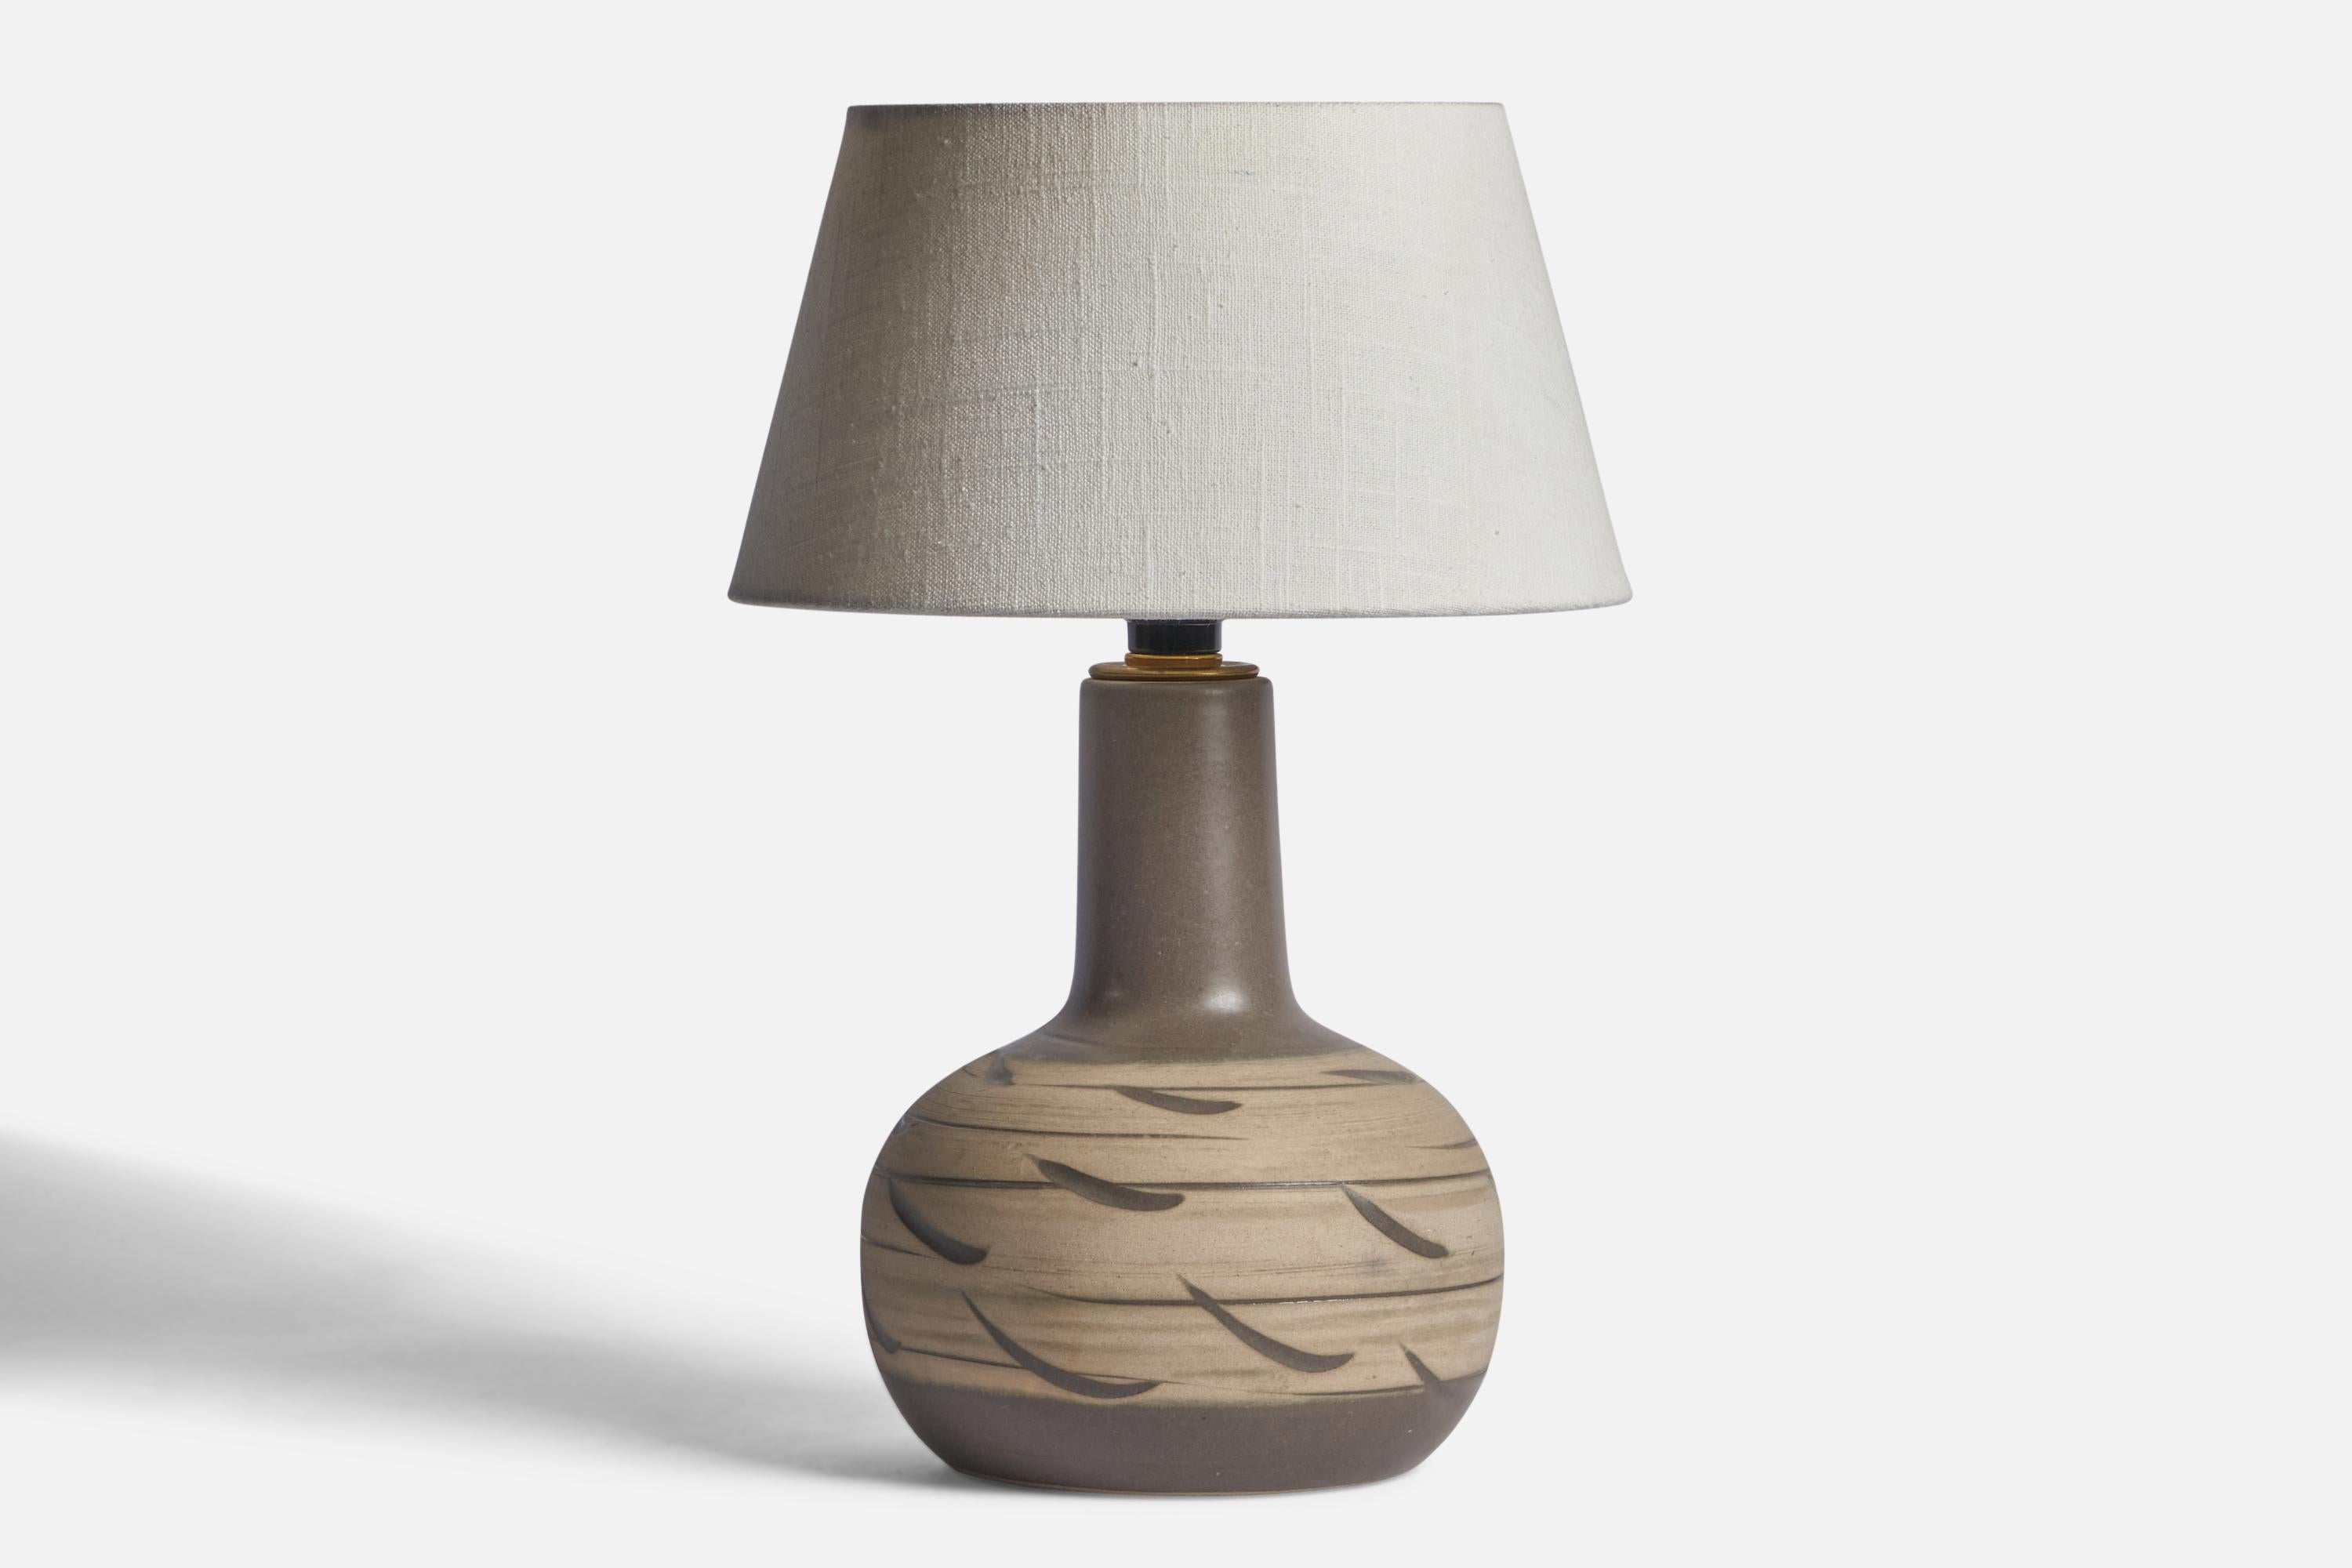 A grey-glazed ceramic table lamp designed by Jane & Gordon Martz and produced by Marshall Studios, USA, 1960s.
Dimensions of Lamp (inches): 12.25” H x 7.2” Diameter
Dimensions of Shade (inches): 7” Top Diameter x 10” Bottom Diameter x 5.5” H